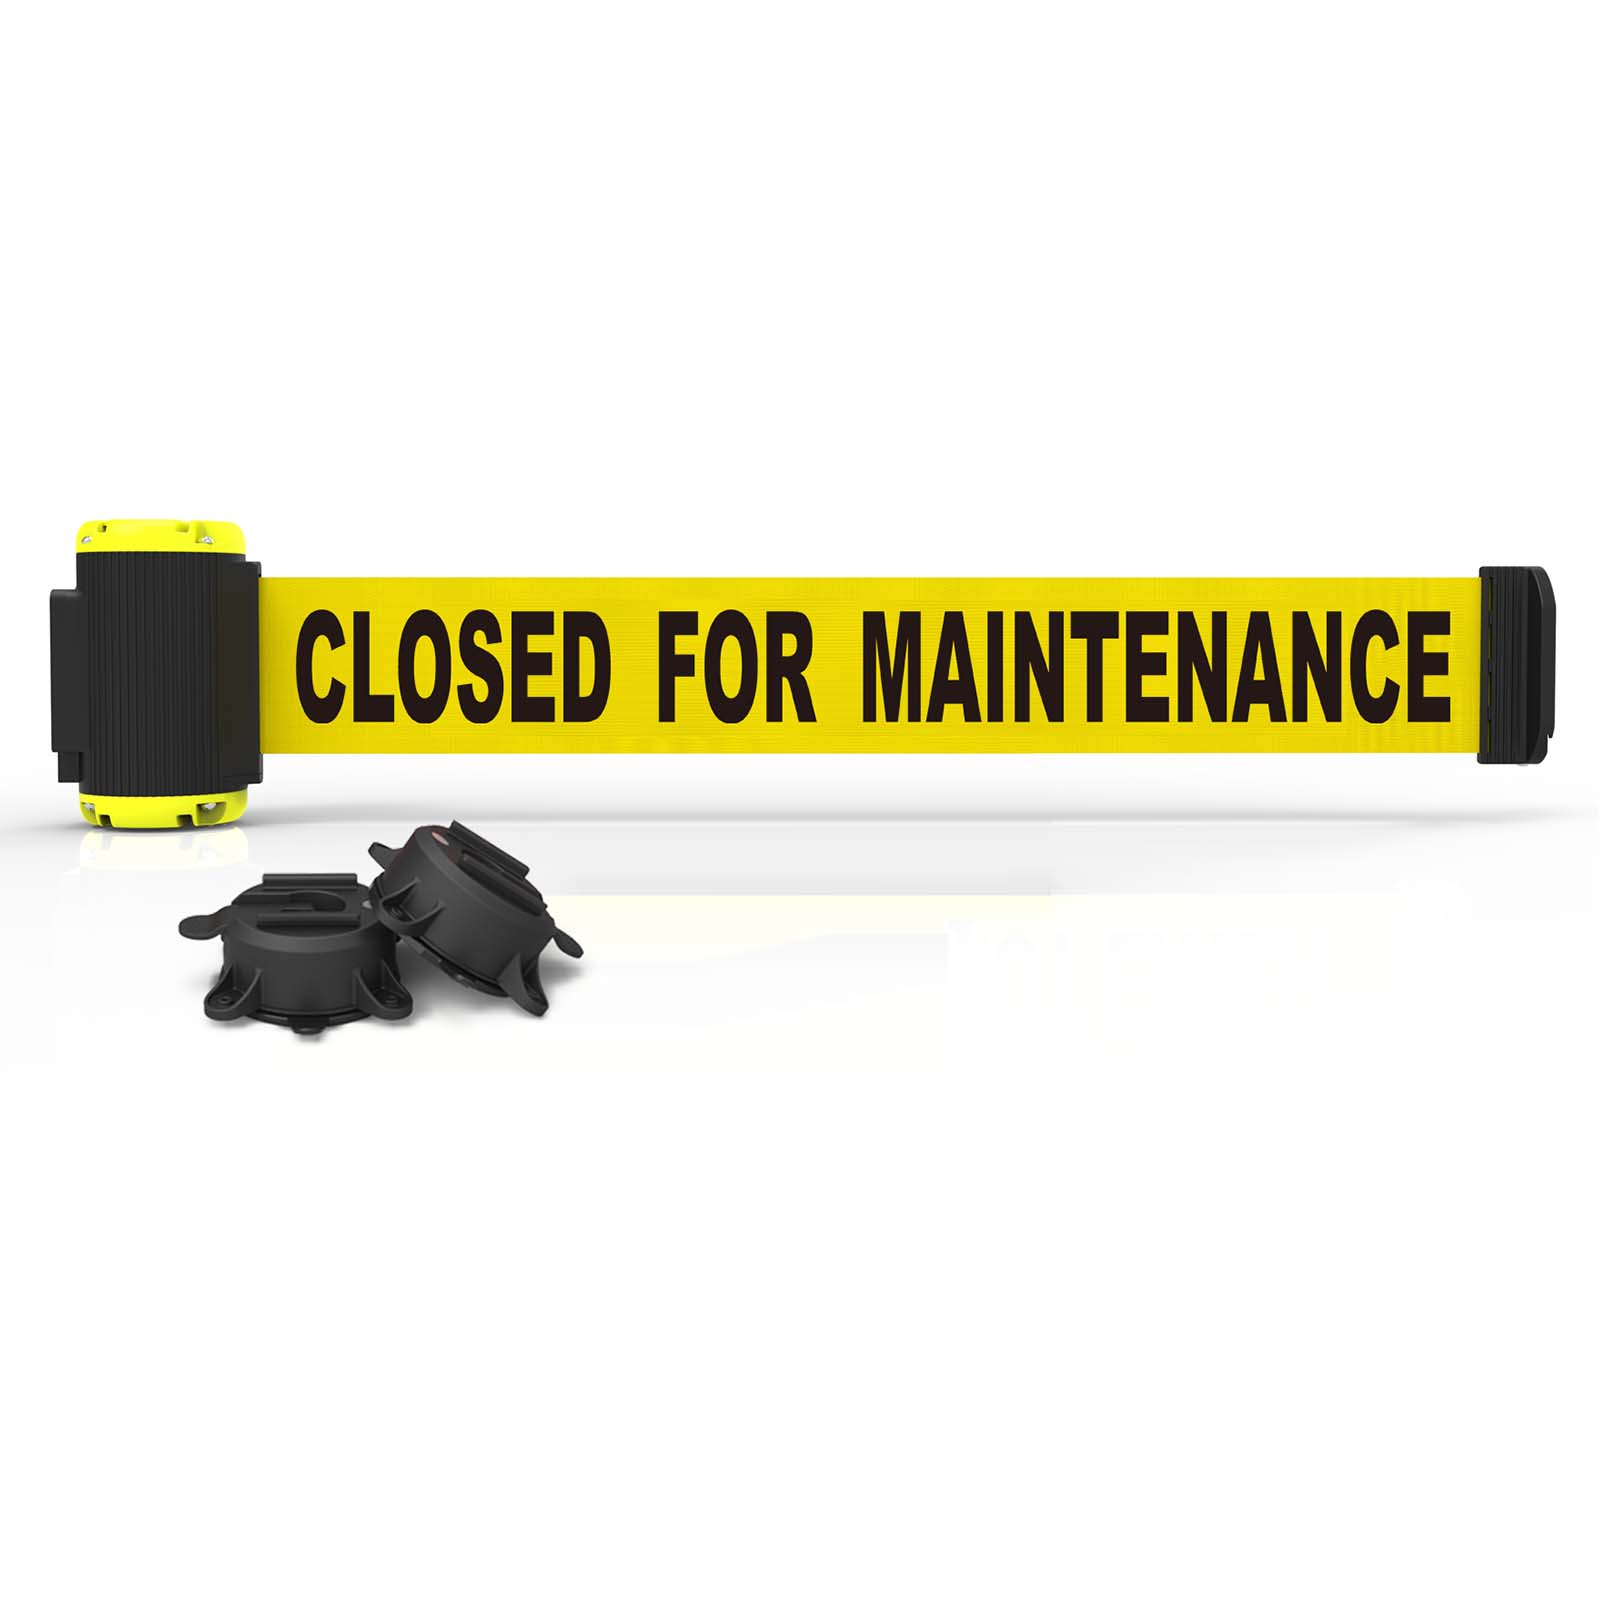 Banner Stakes MH7006 7' Magnetic Wall Mount - Yellow "Closed for Maintenance" Banner